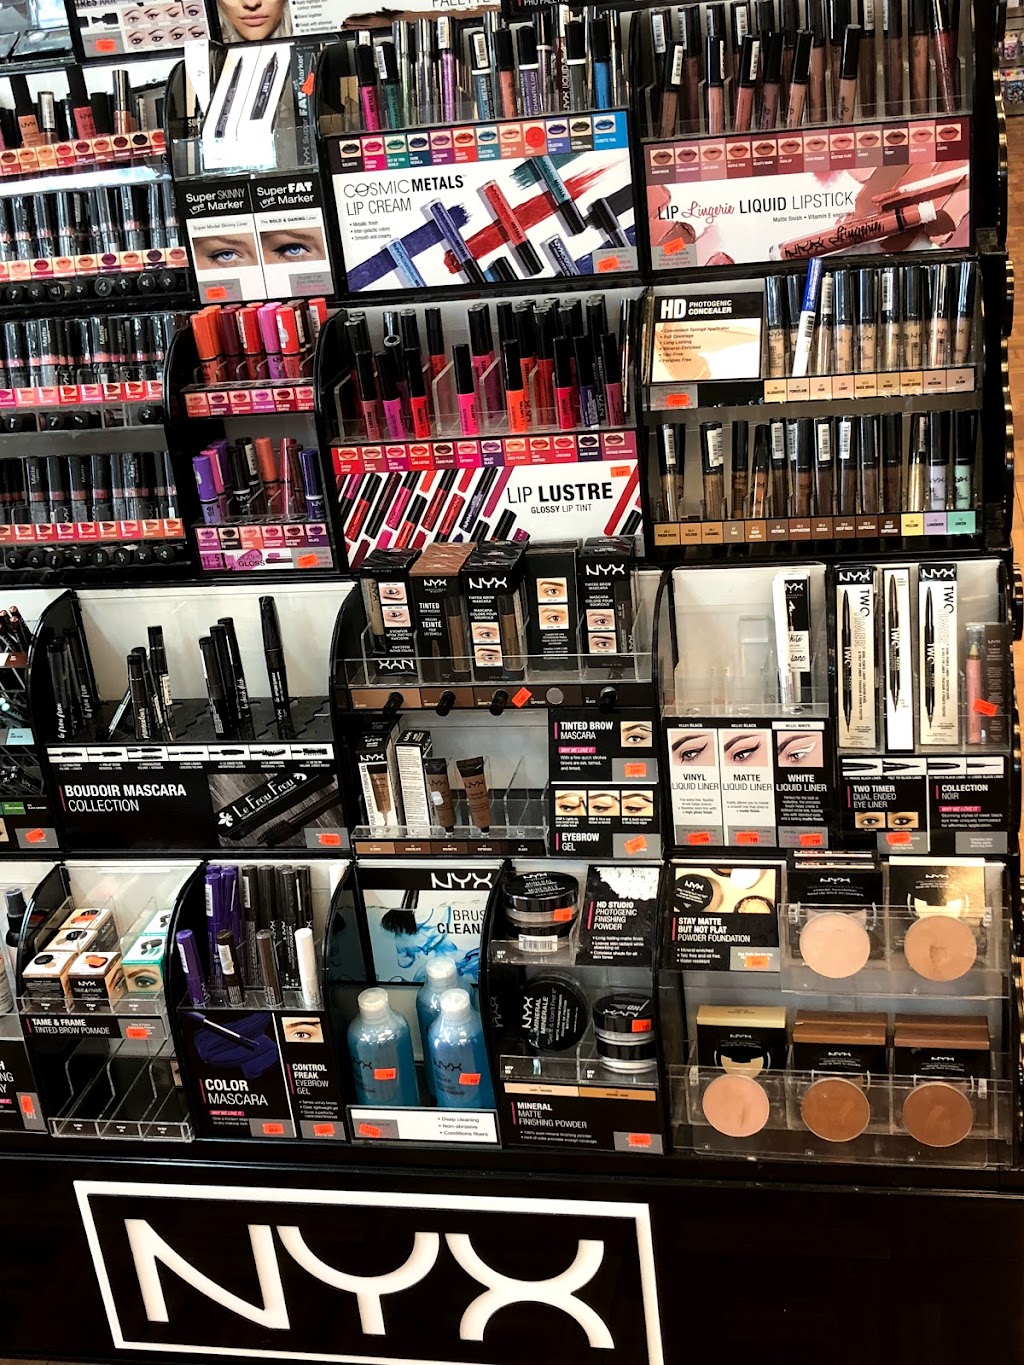 Hollywood beauty supply & shoes | 5635 Hollywood Blvd, Hollywood, FL 33021 | Phone: (754) 201-1770